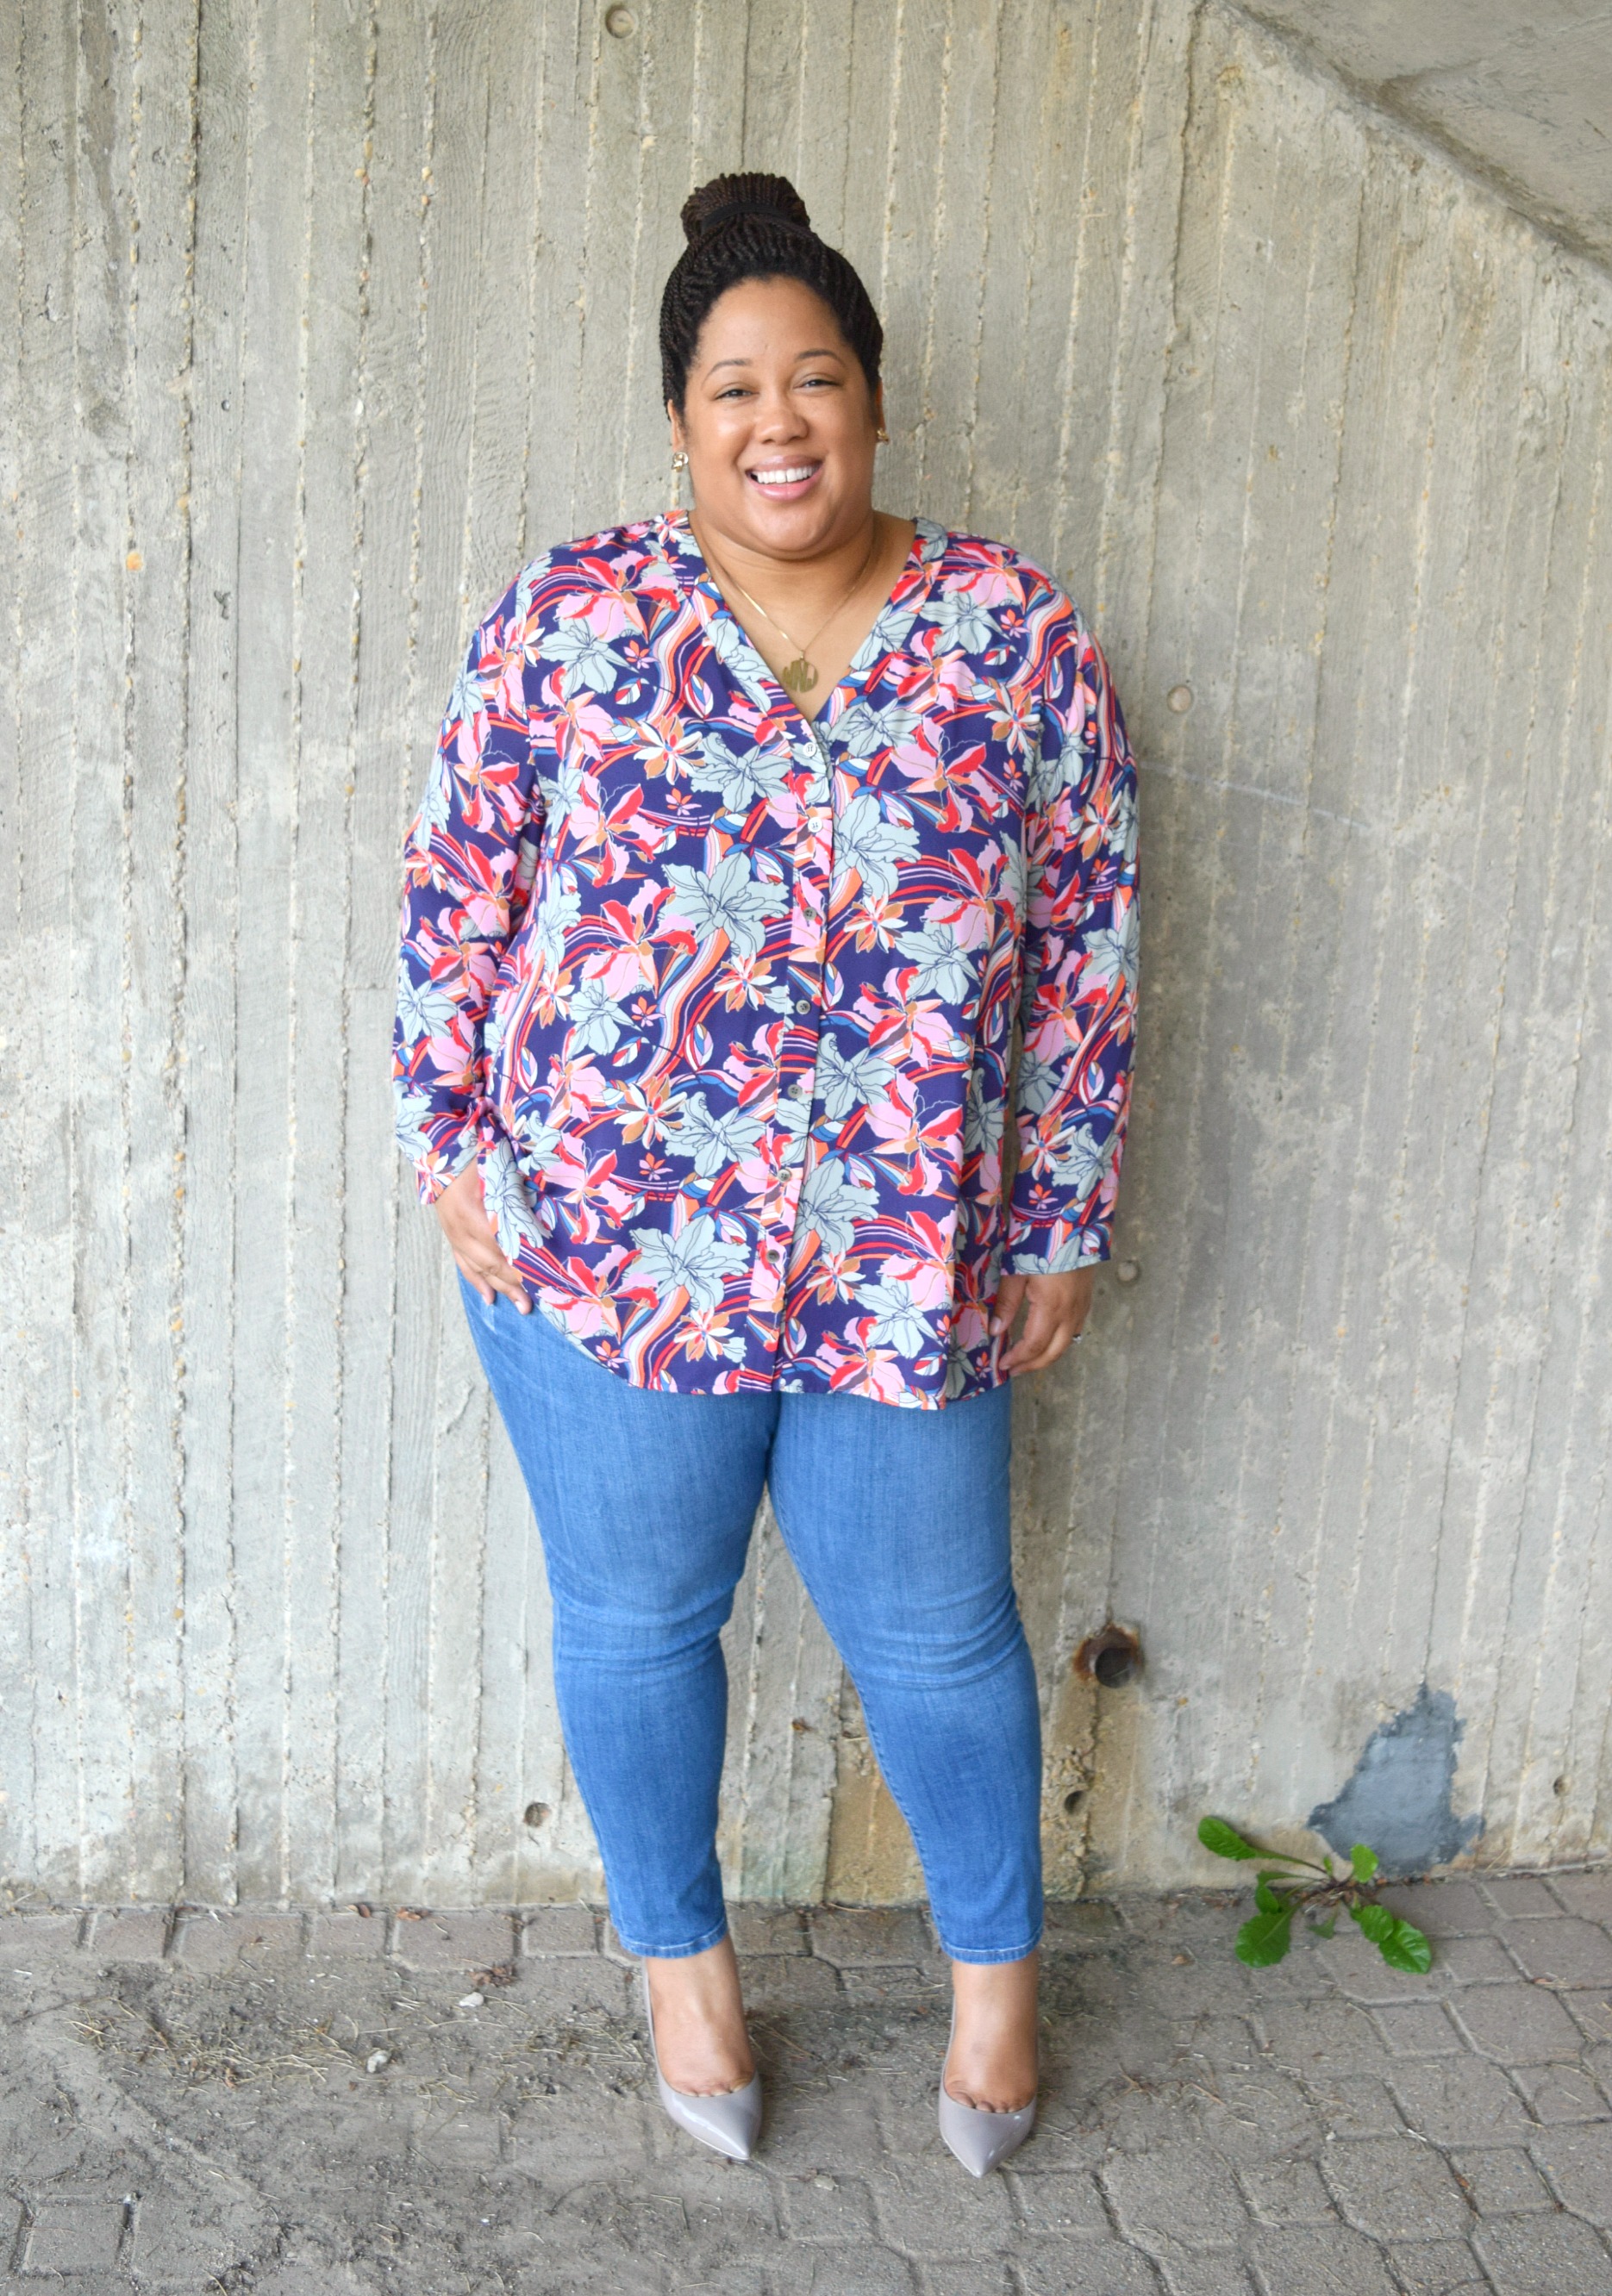 OOTD - Floral Blouse and Denim